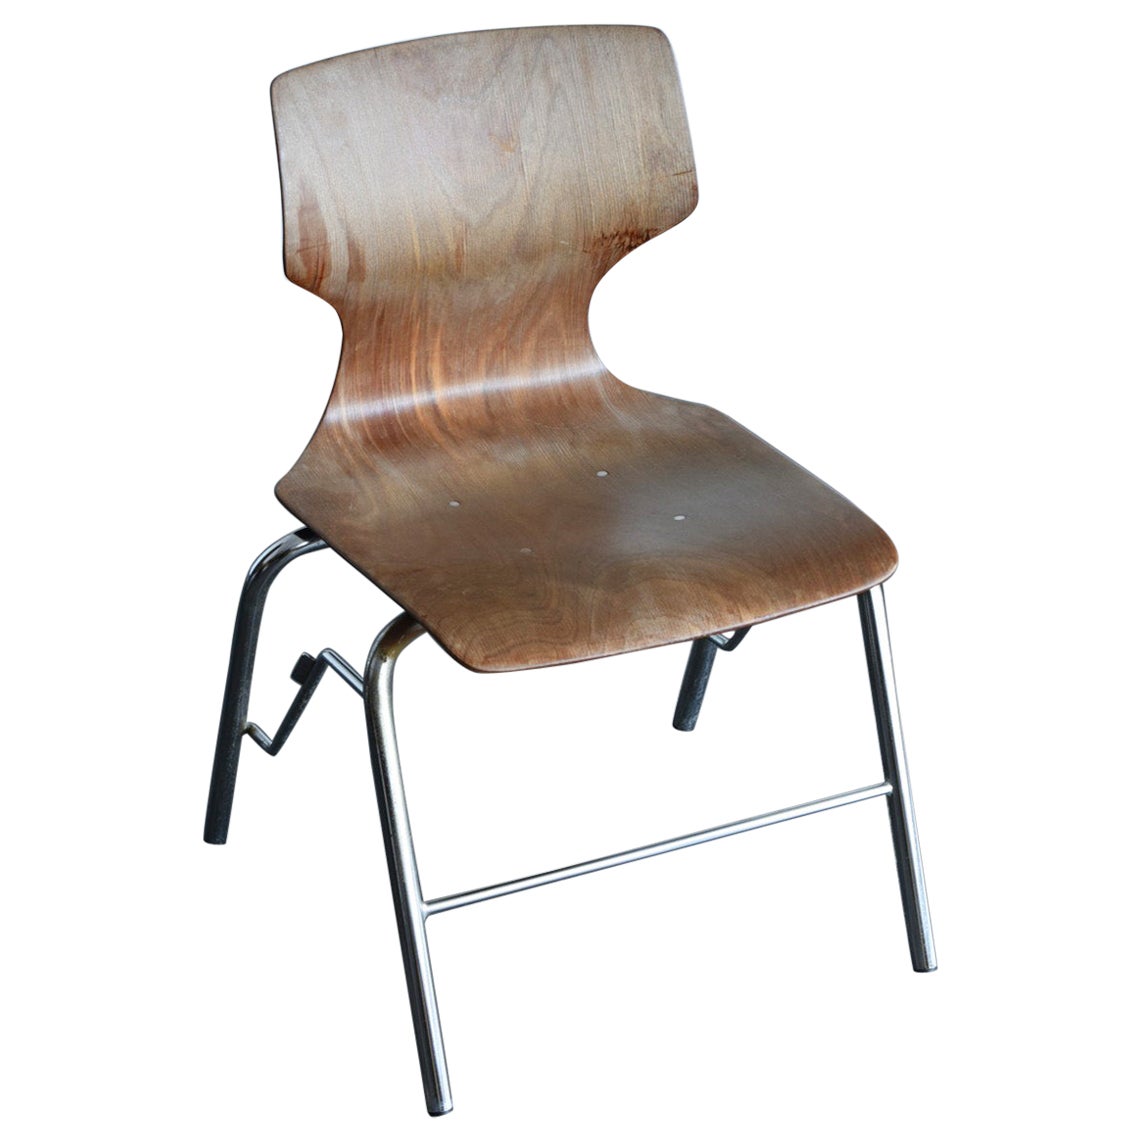 "AIPAG"/Japanese and German Modern Stacking Chairs/PAGHOLZ/PAGWOOD/Stock B For Sale